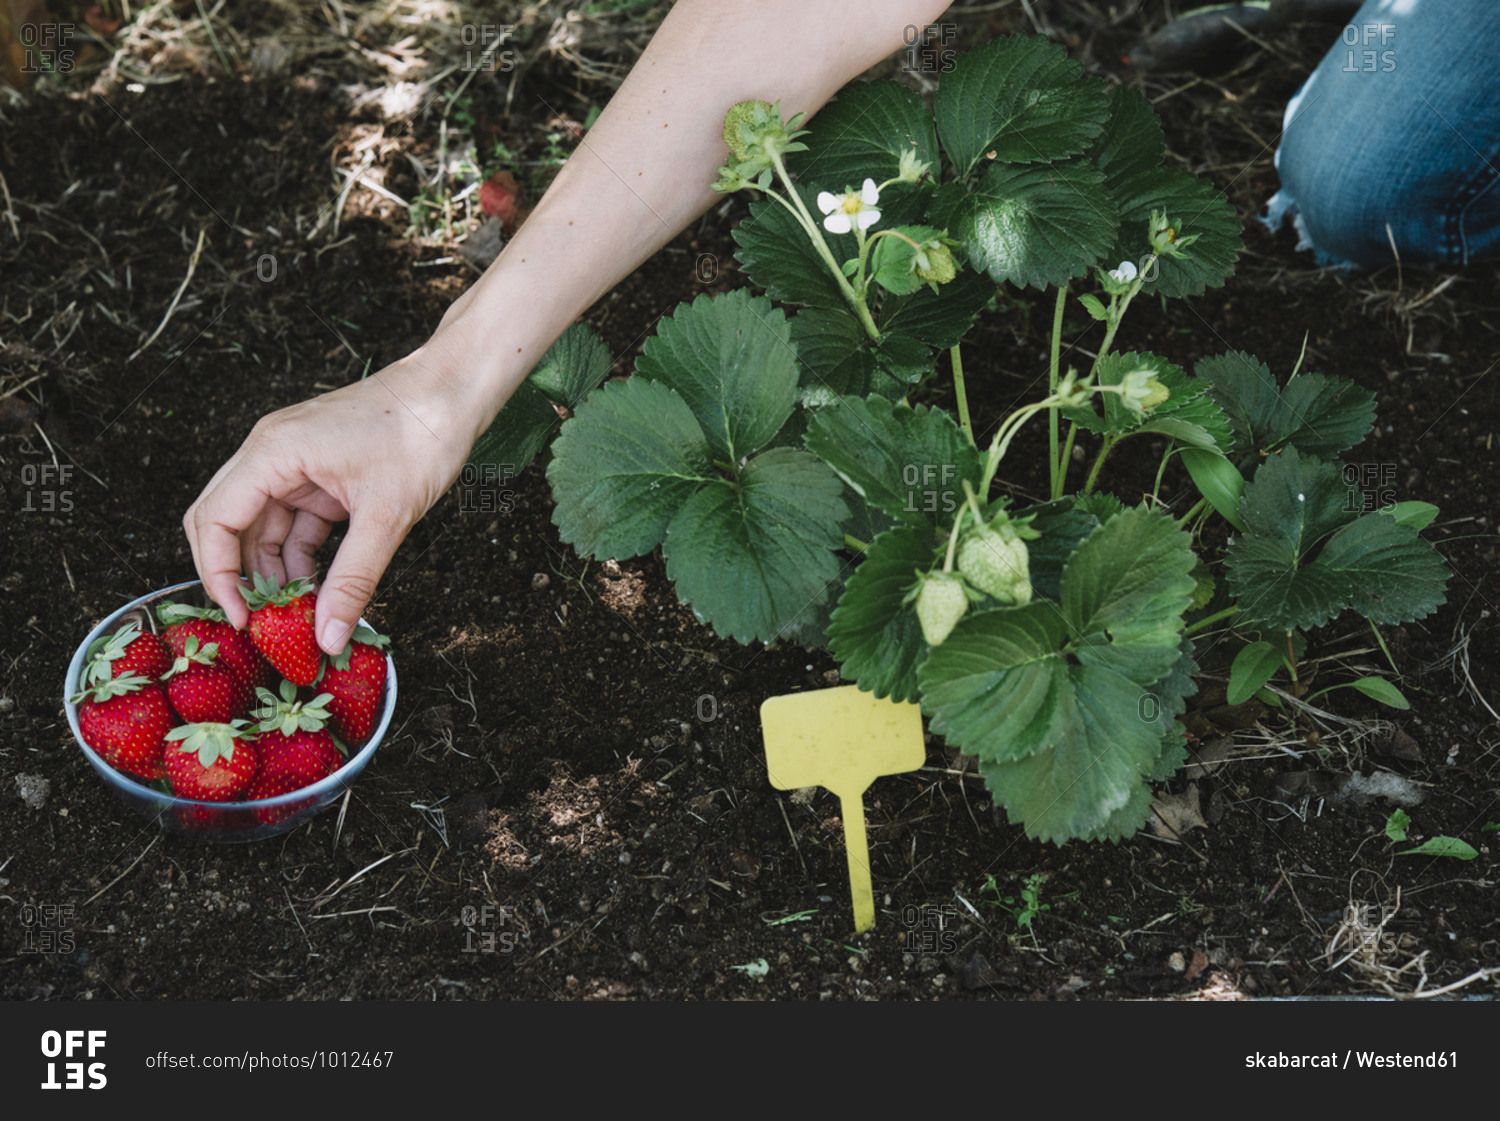 Close-up of woman hand picking strawberries from plants in community garden